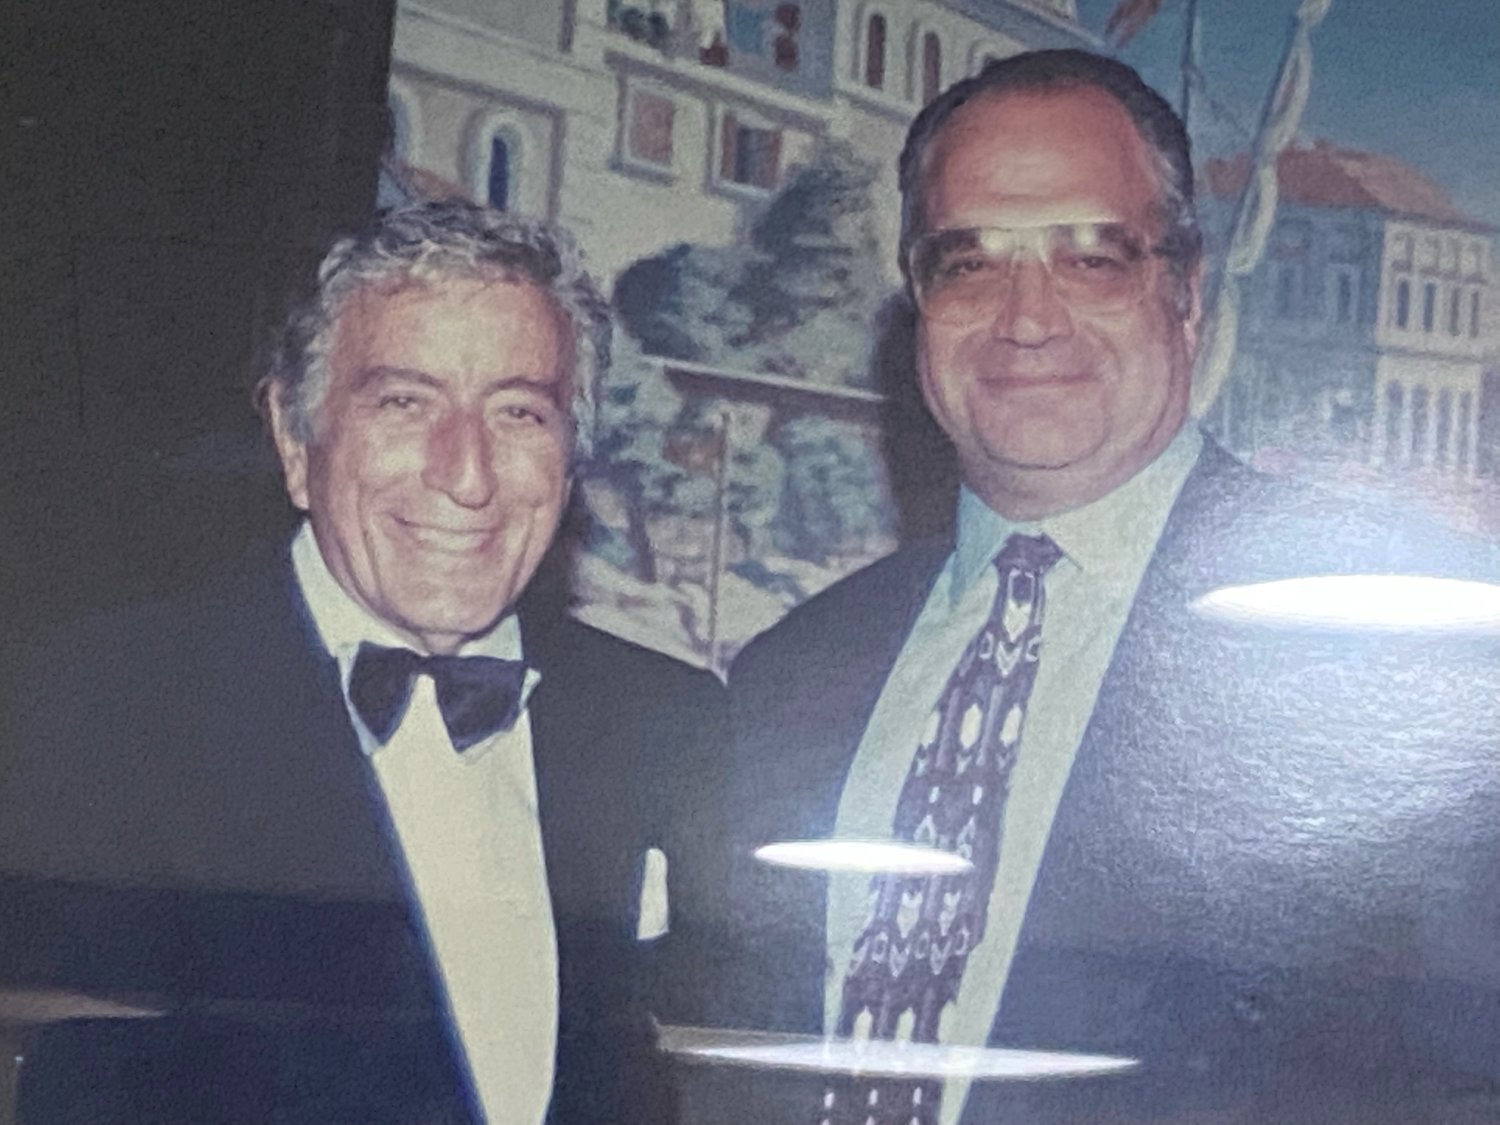 Familiar faces have stopped by over the years. Tony Bennett, left, and Anthony Capetola met at The Carltun.